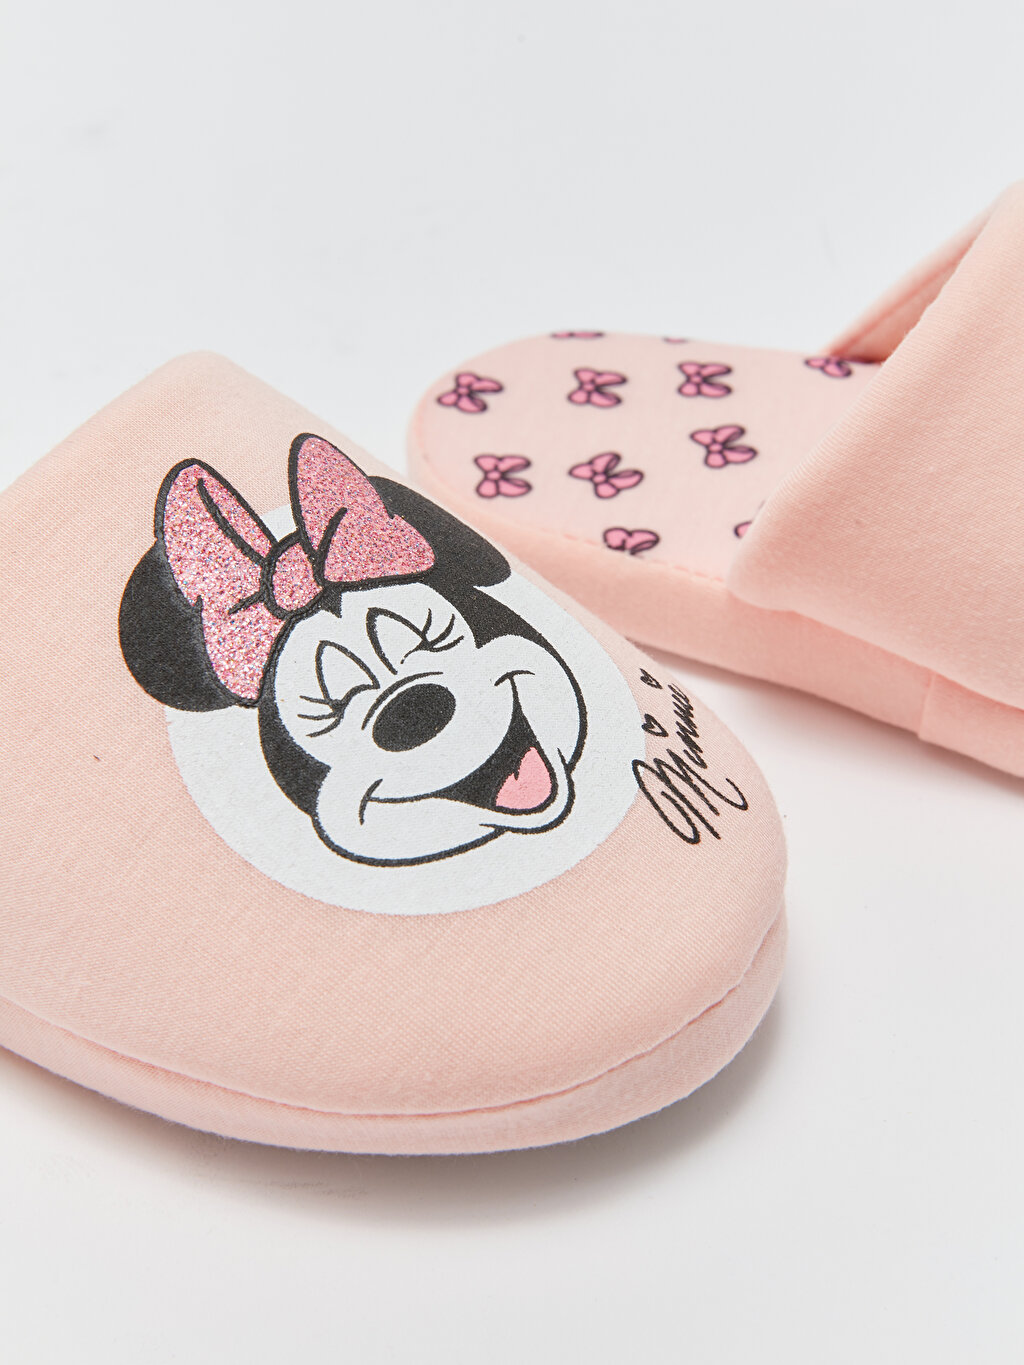 Disney Slippers - Plush Minnie Mouse Shoes